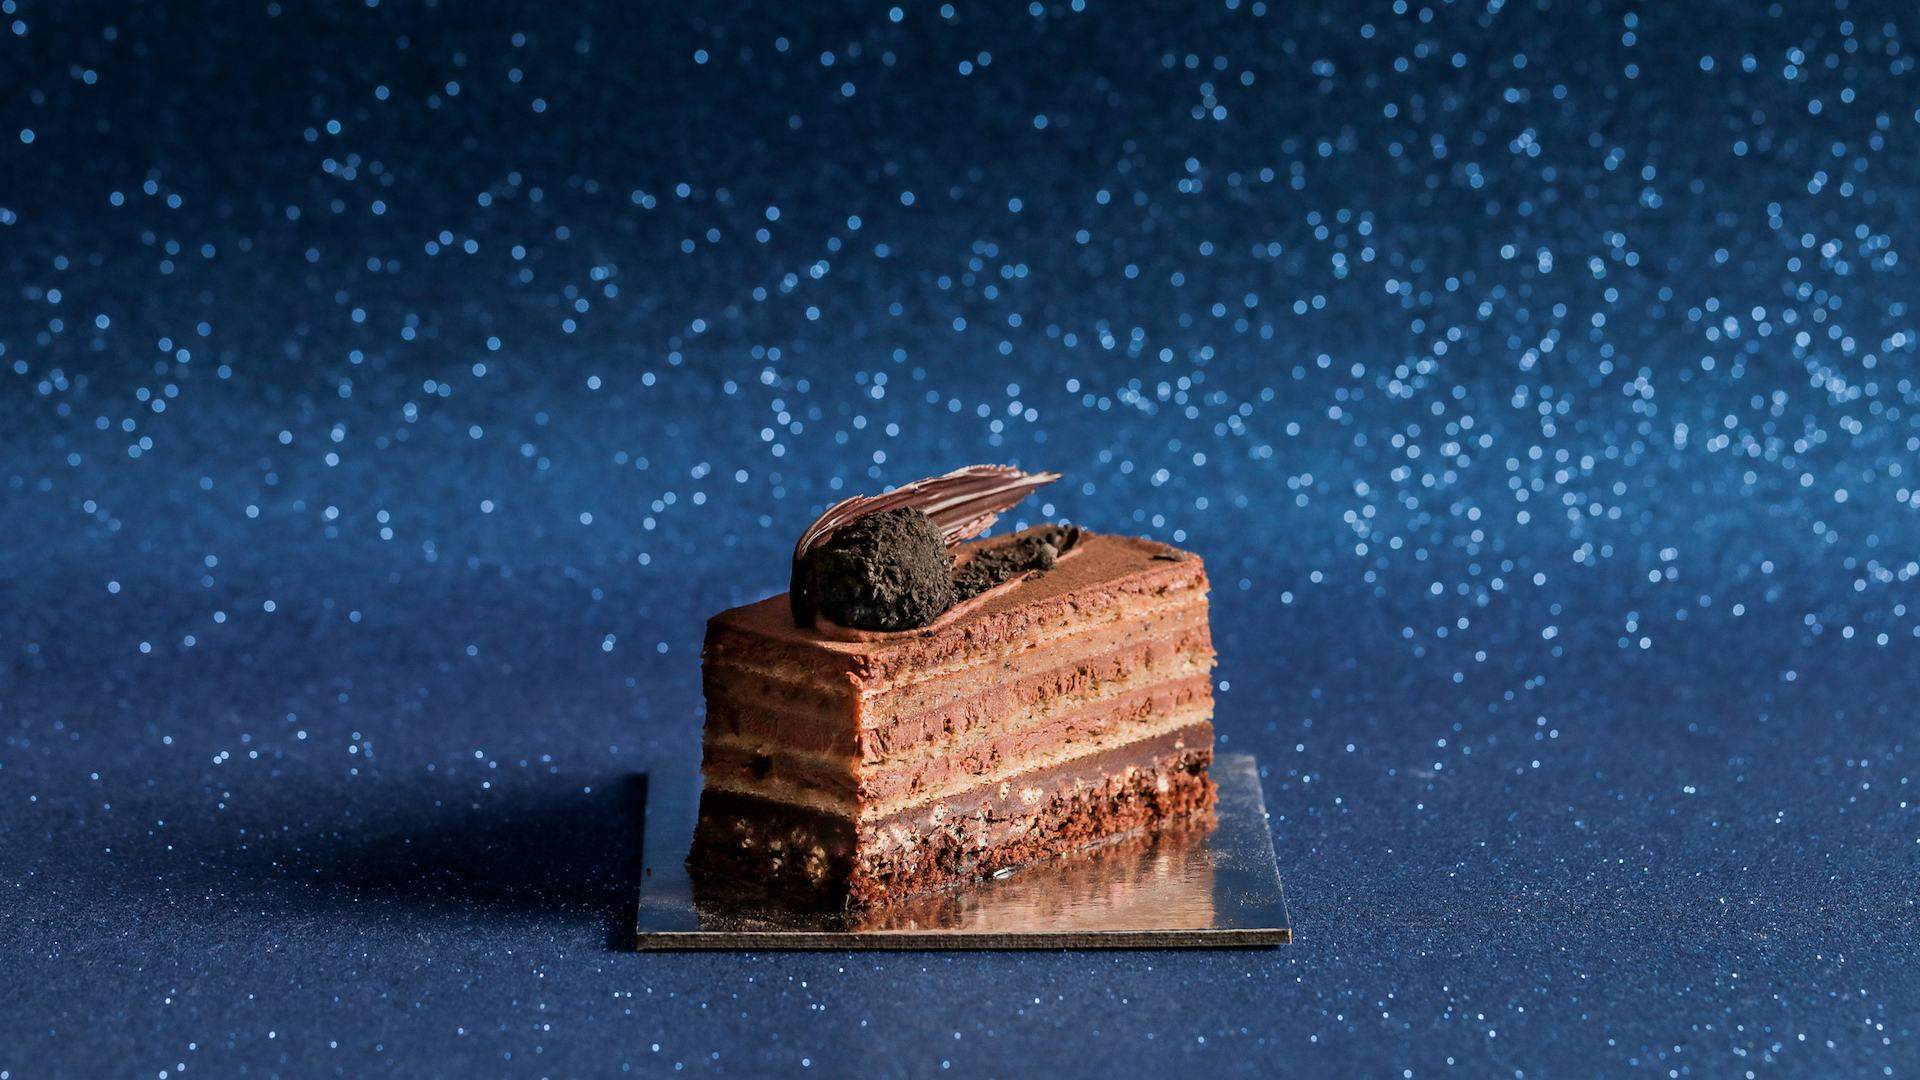 Black Star Pastry and Koko Black Are Creating a Limited-Edition Space-Themed Cake For World Chocolate Day